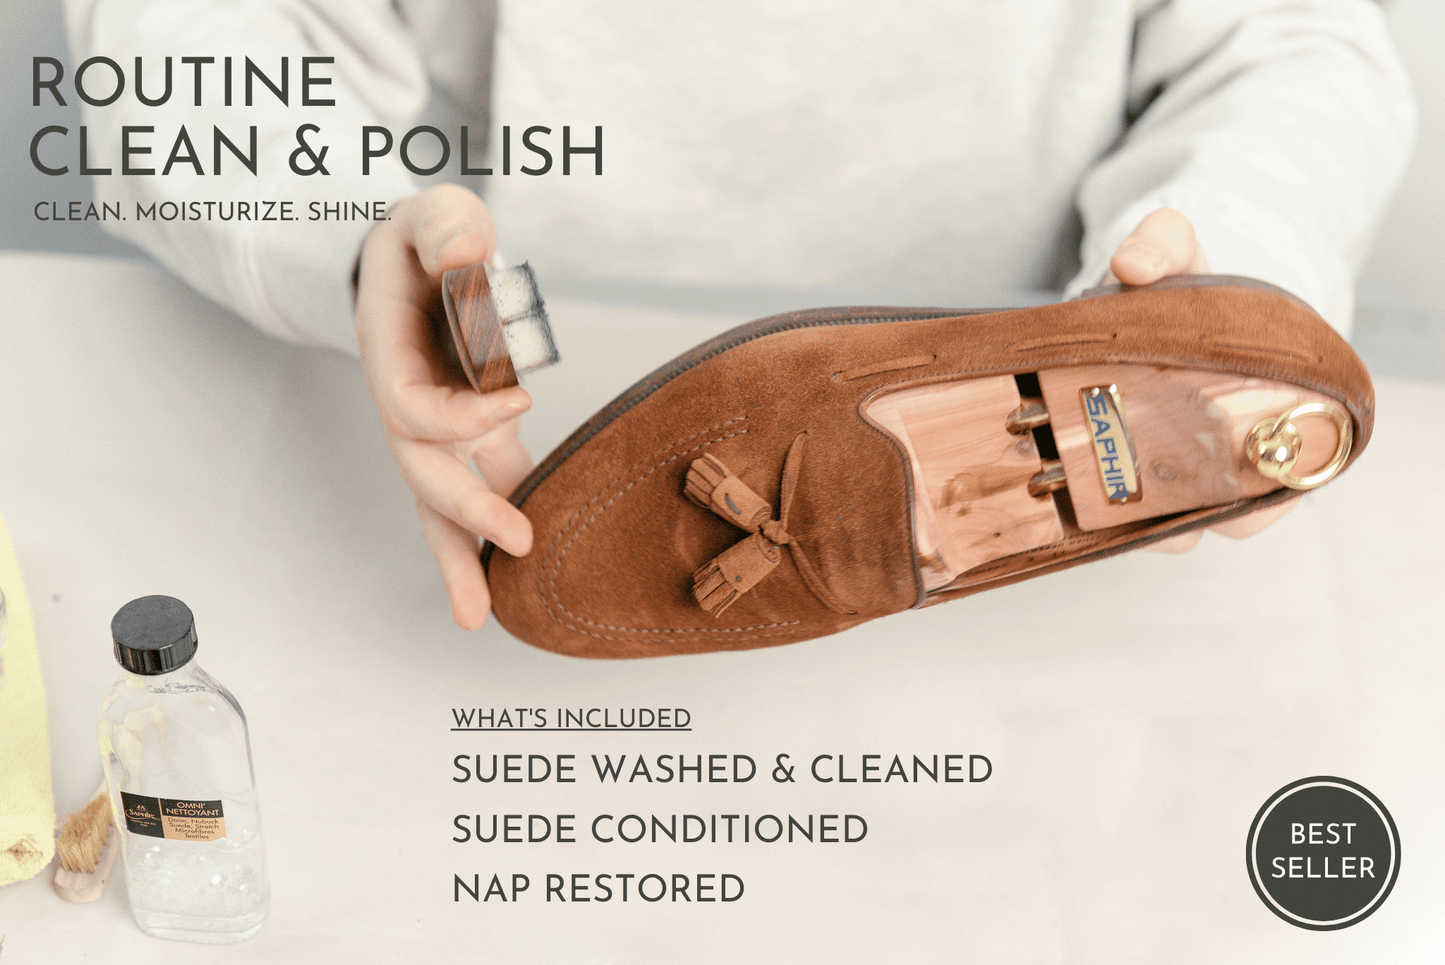 Brillaré Routine Shoe Clean & Polish - Crockett & Jones Cavendish loafer in snuff suede being brushed with Saphir Suede Crepe brush and displayed with Saphir Omni'nettoyant suede shampoo cleaning solution